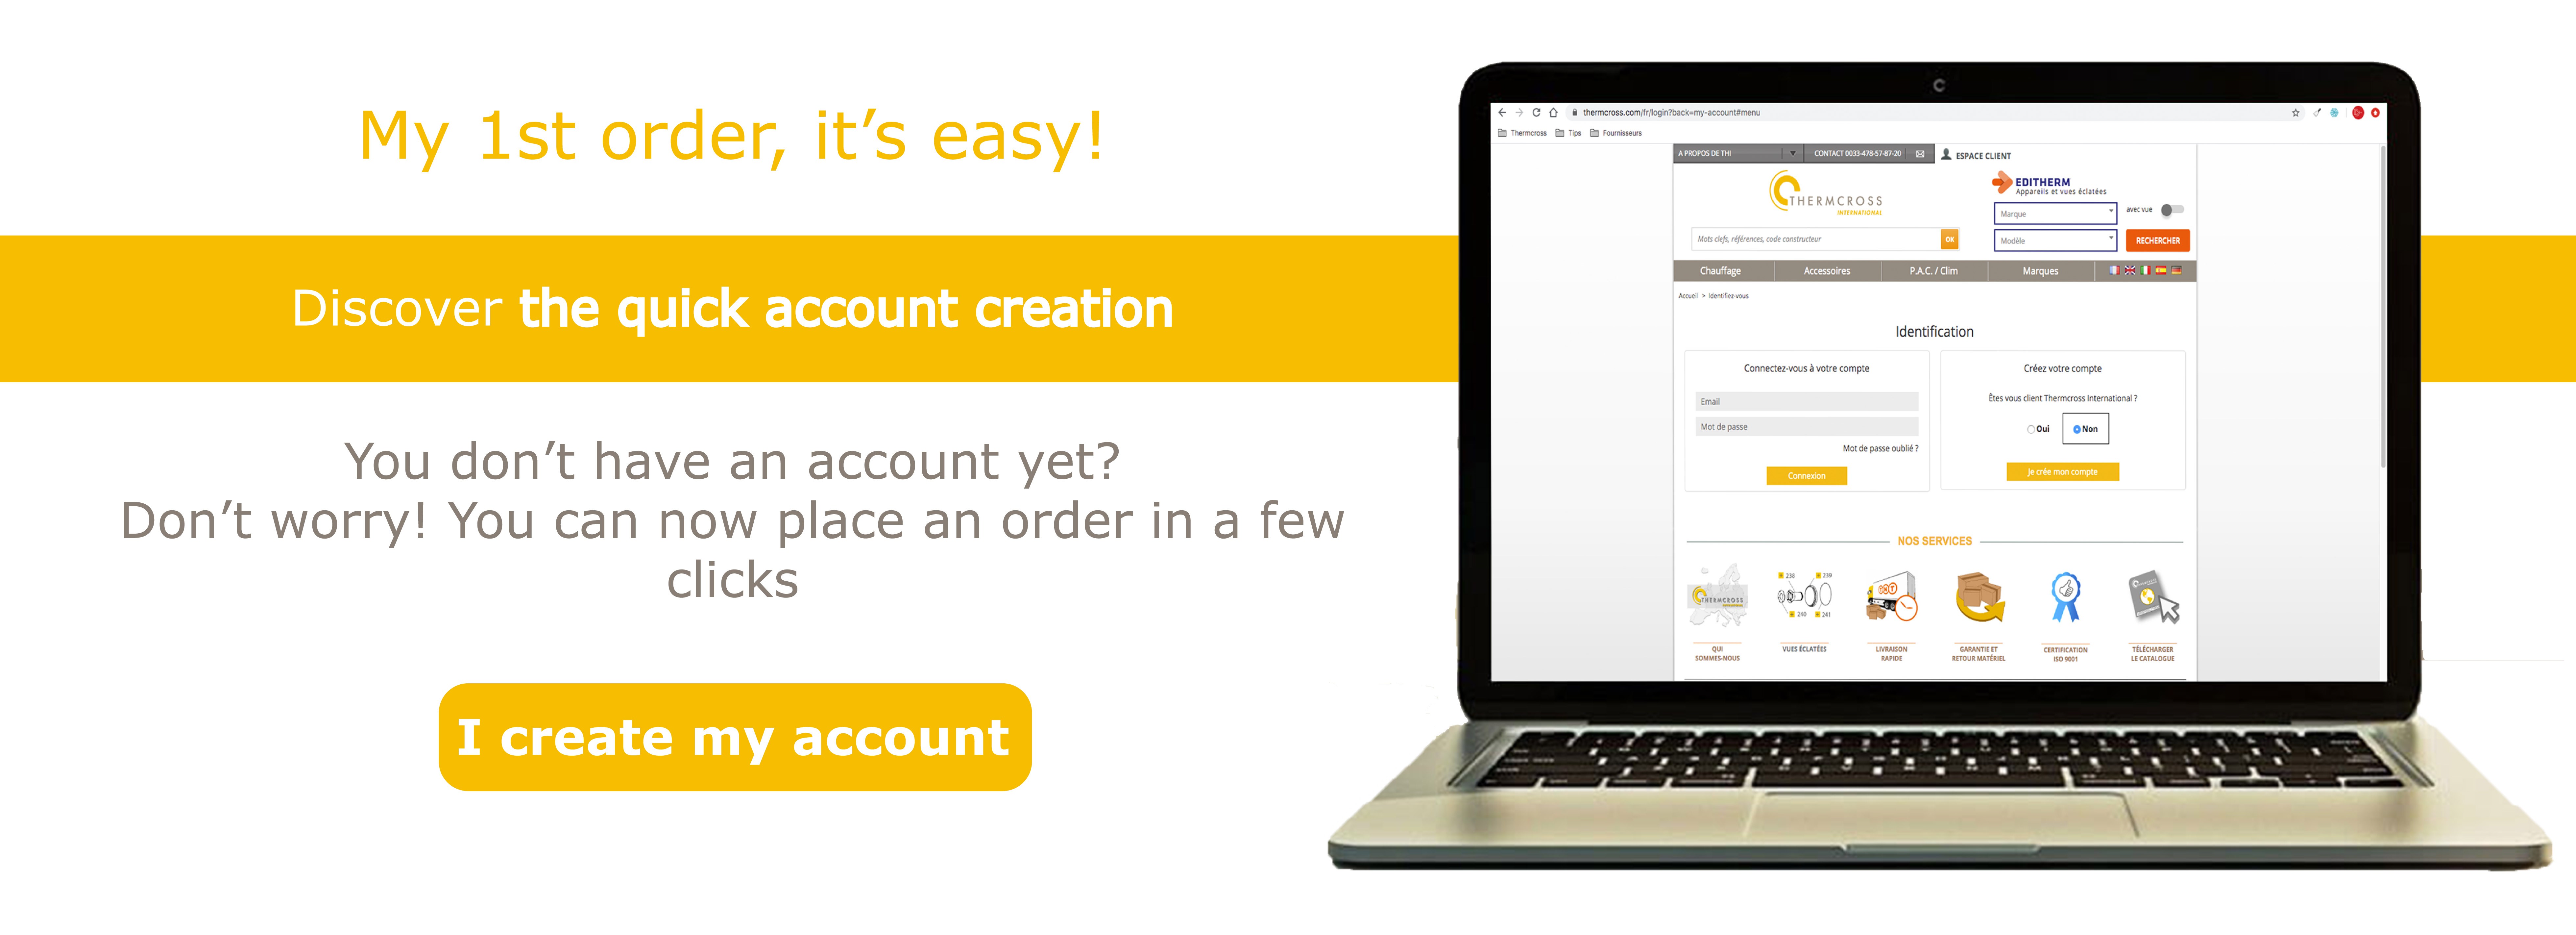 the quick account creation